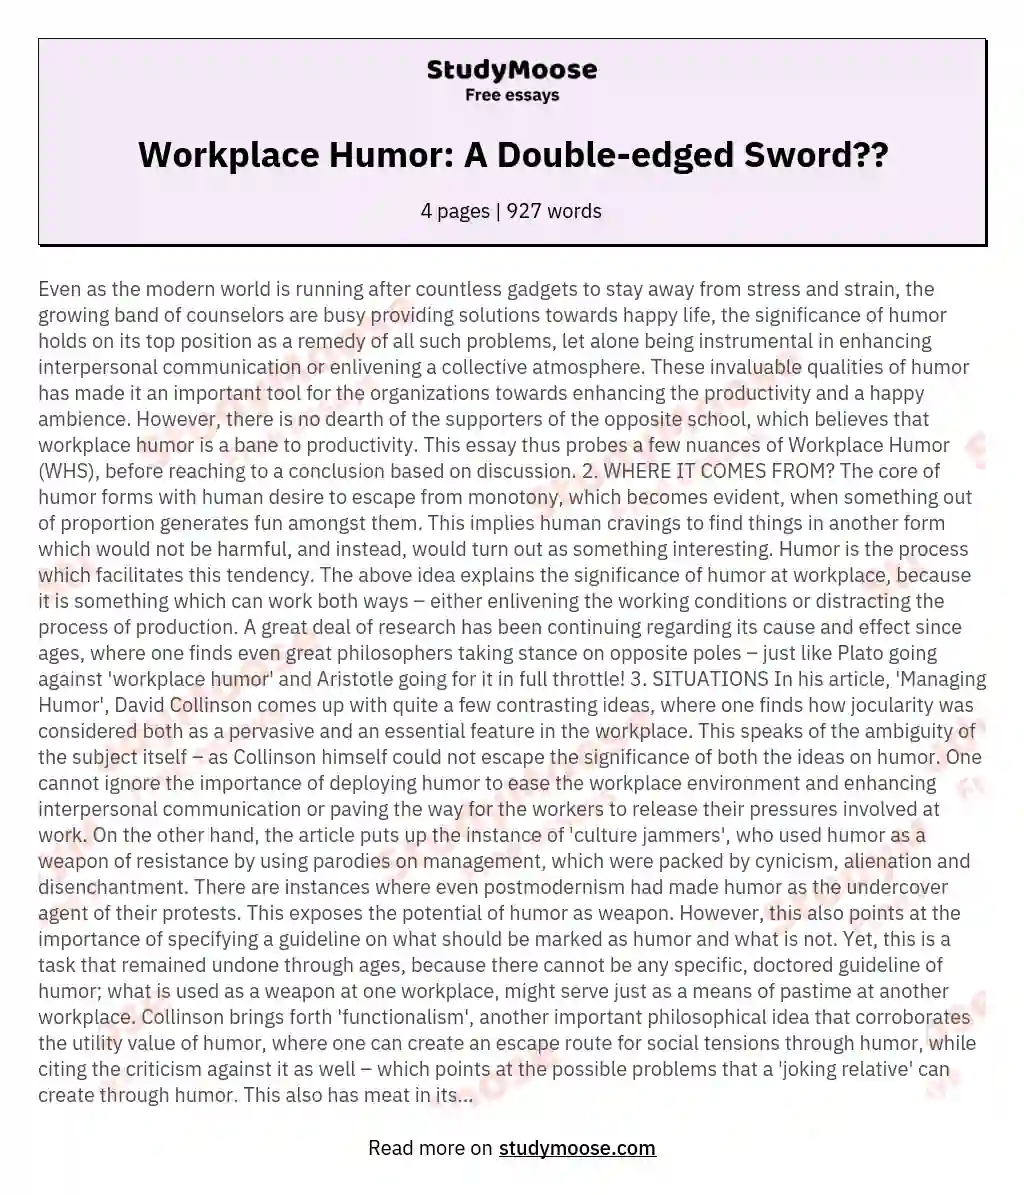 Workplace Humor: A Double-edged Sword?? essay